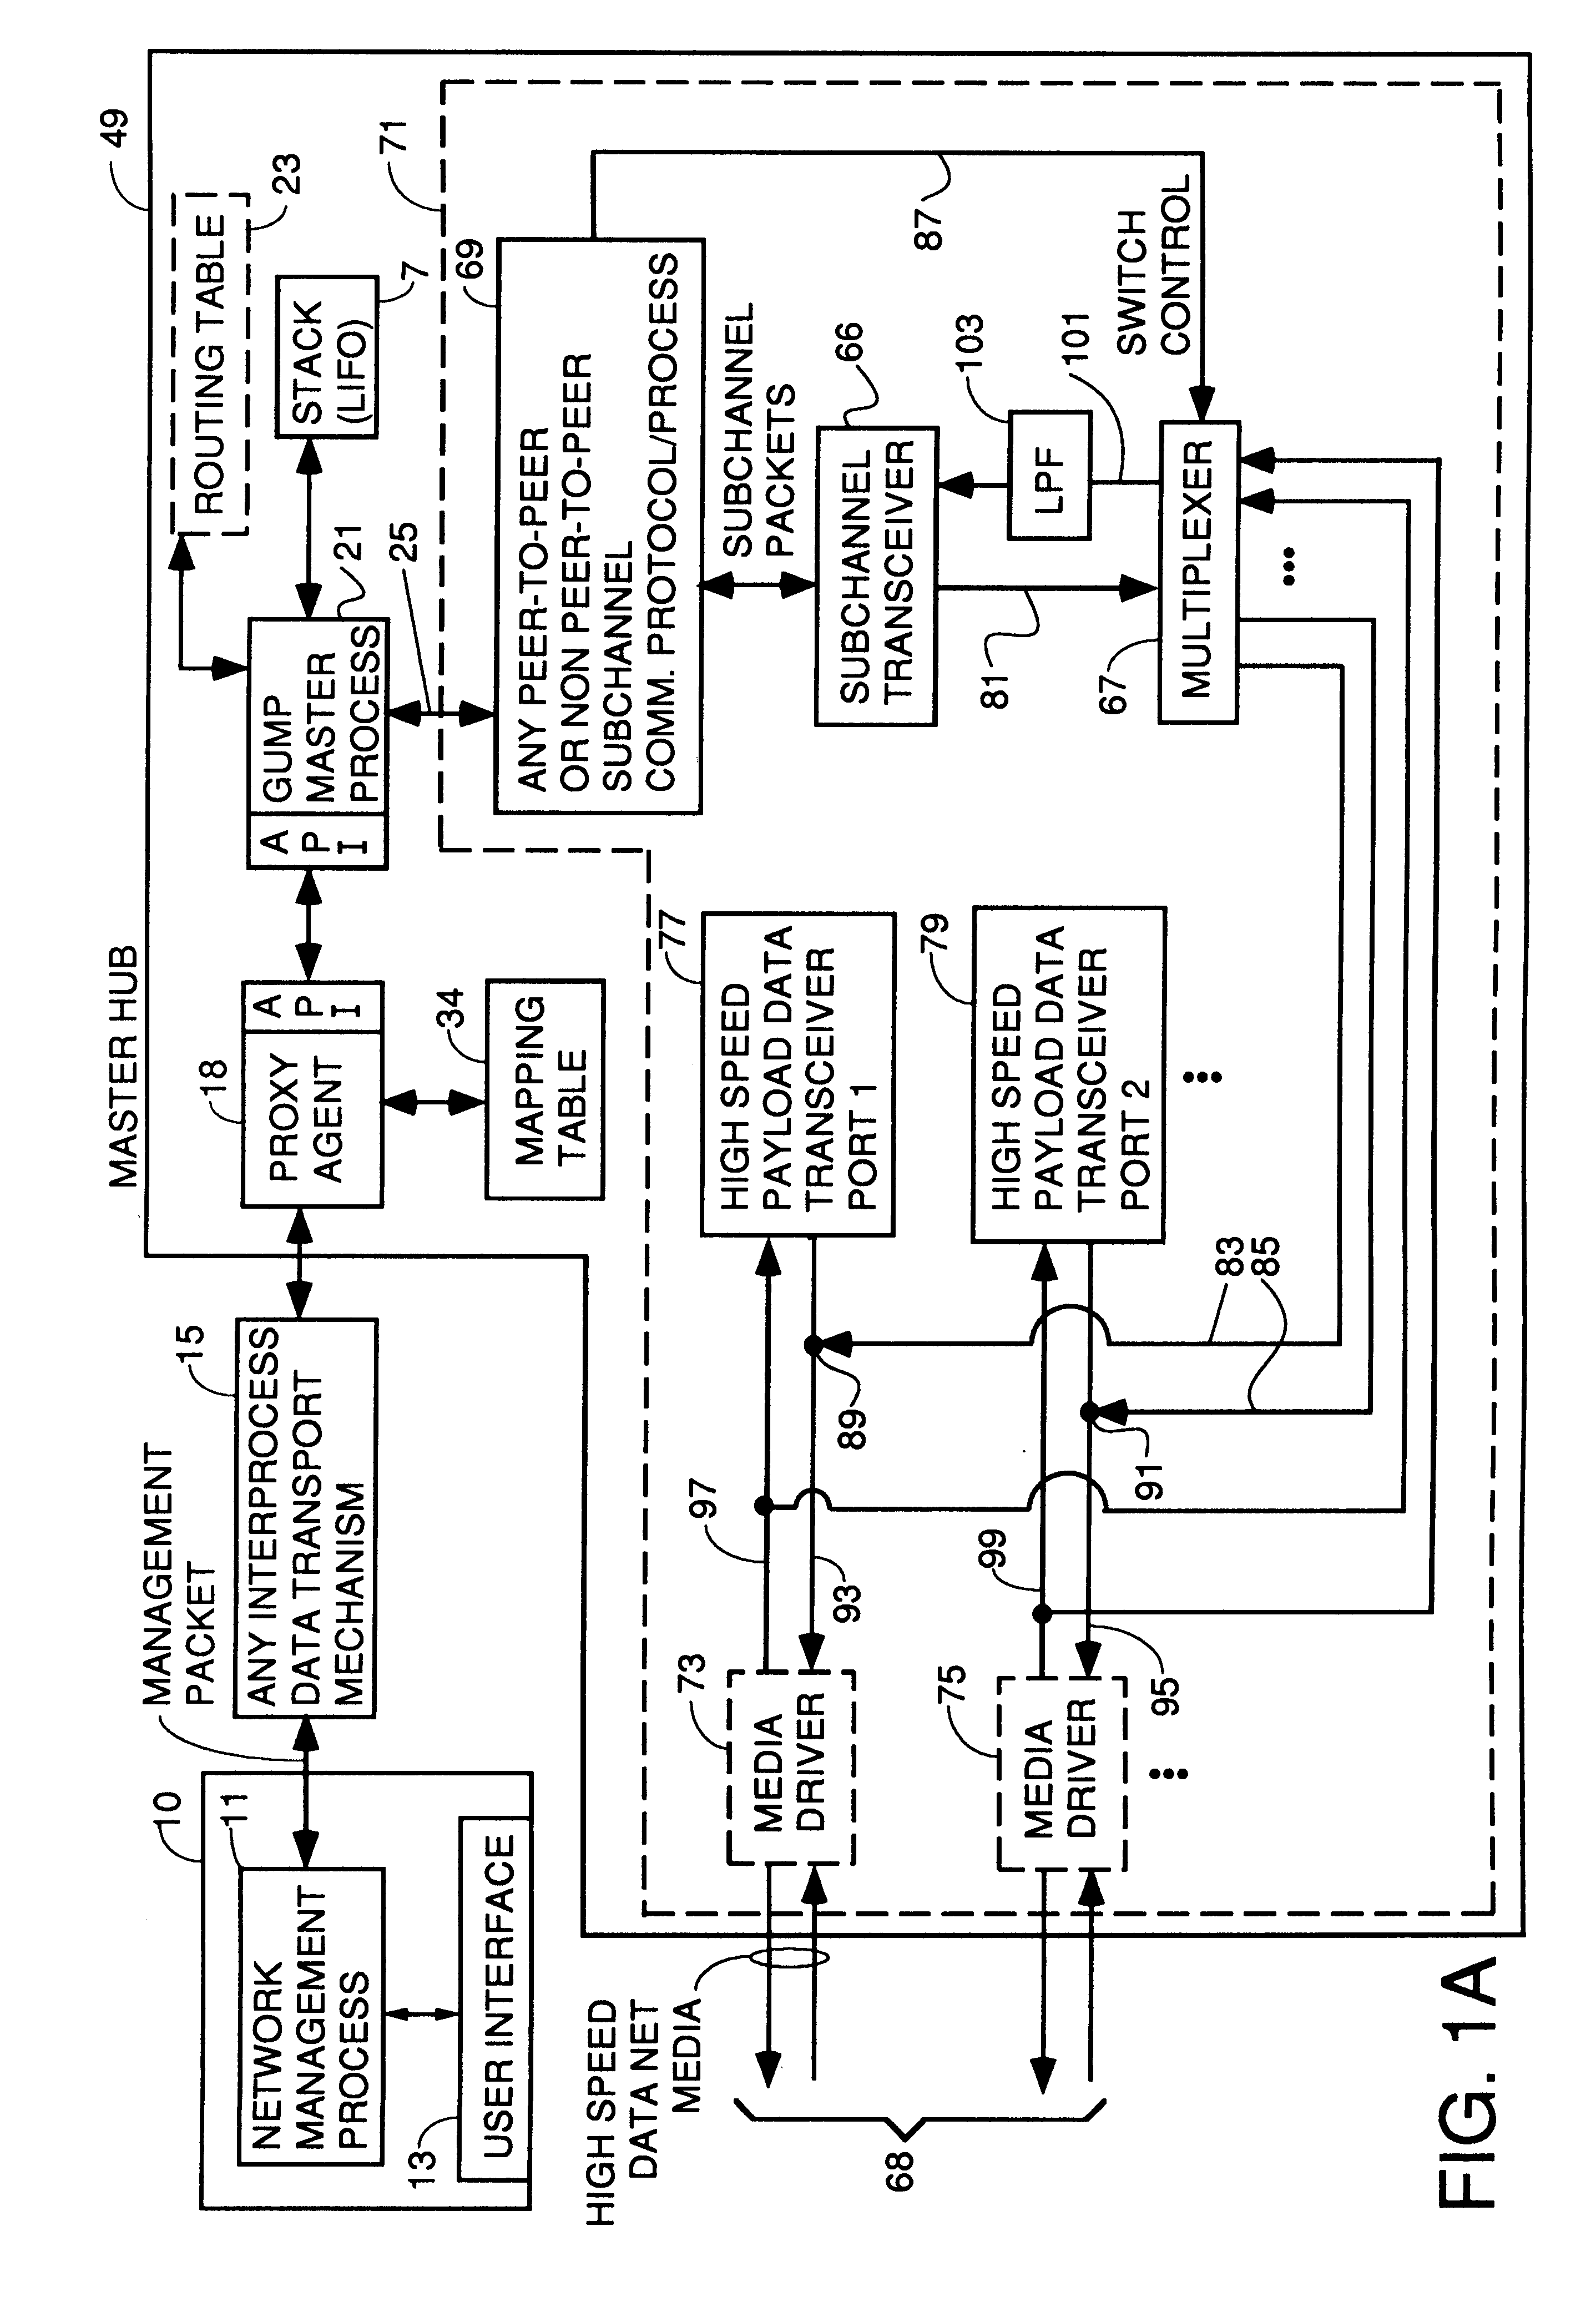 Apparatus and method for unilateral topology discovery in network management